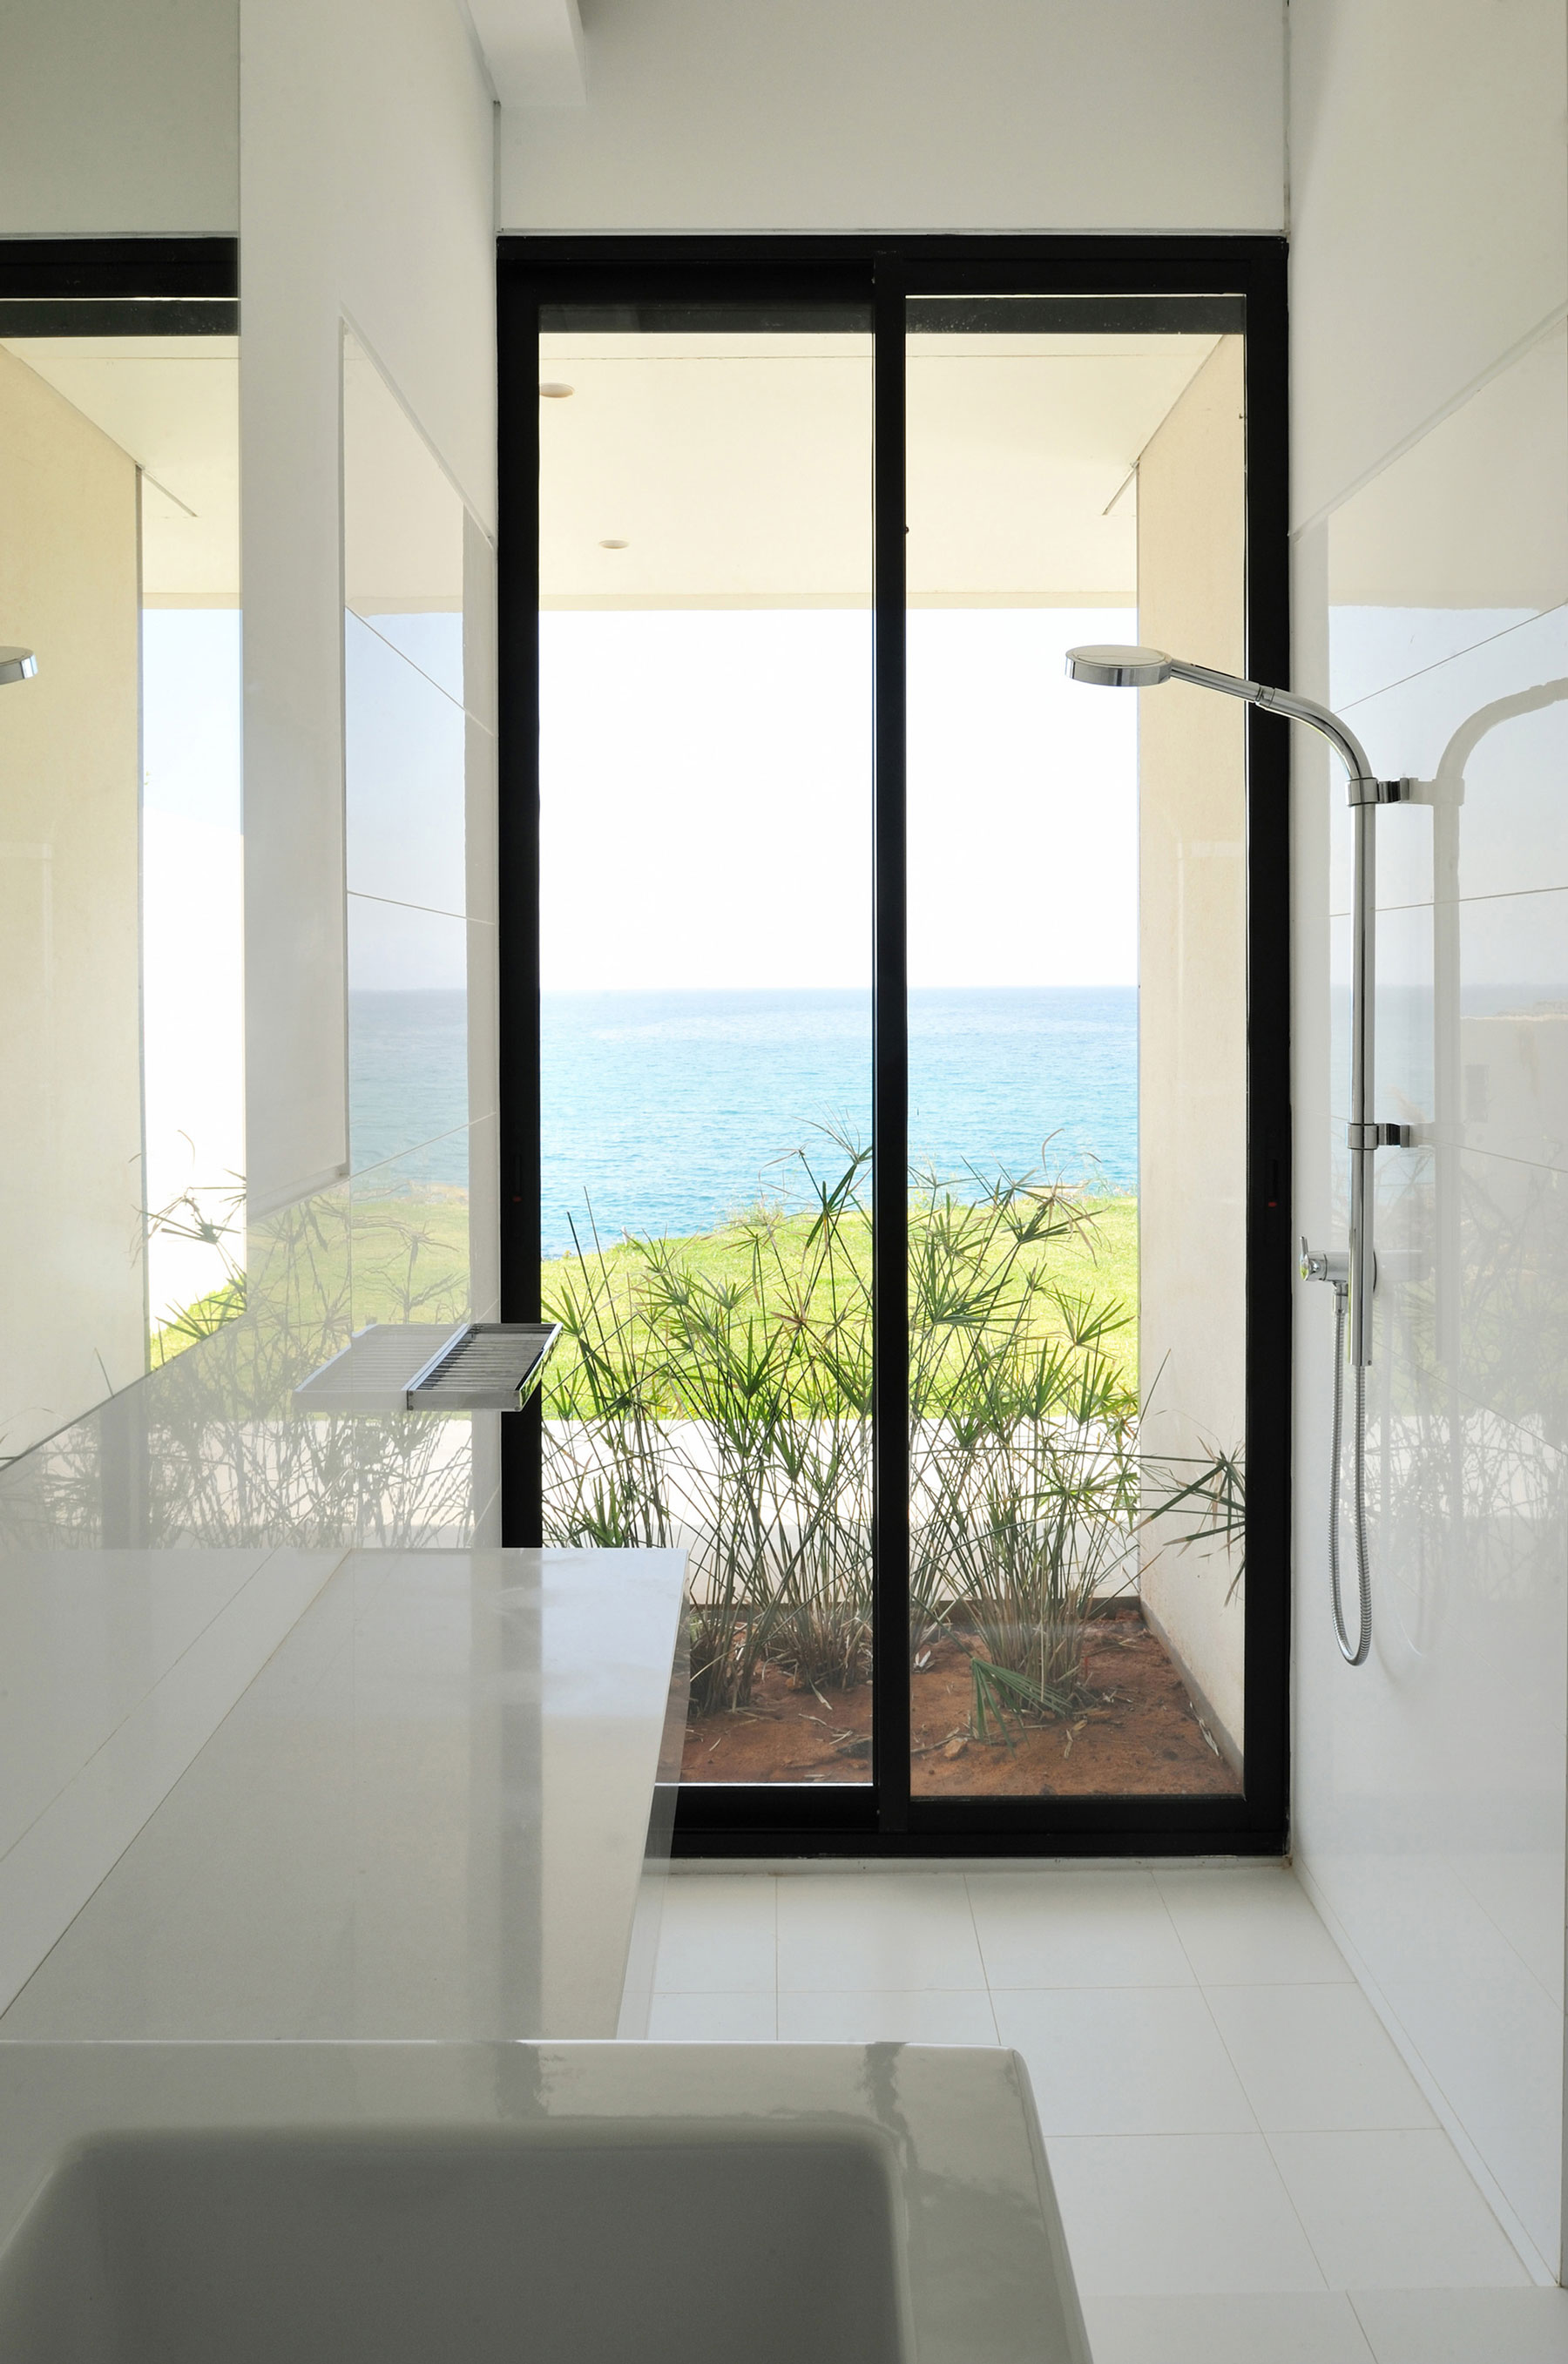 Beach View Plants Wonderful Beach View And Ornamental Plants Fidar Beach House Interior Glass Door In Dark Frame Stainless Steel Shower Porcelain Washing Stand Bedroom Futuristic Modern Beach House With Neutral Color Palettes For A Family Of Five